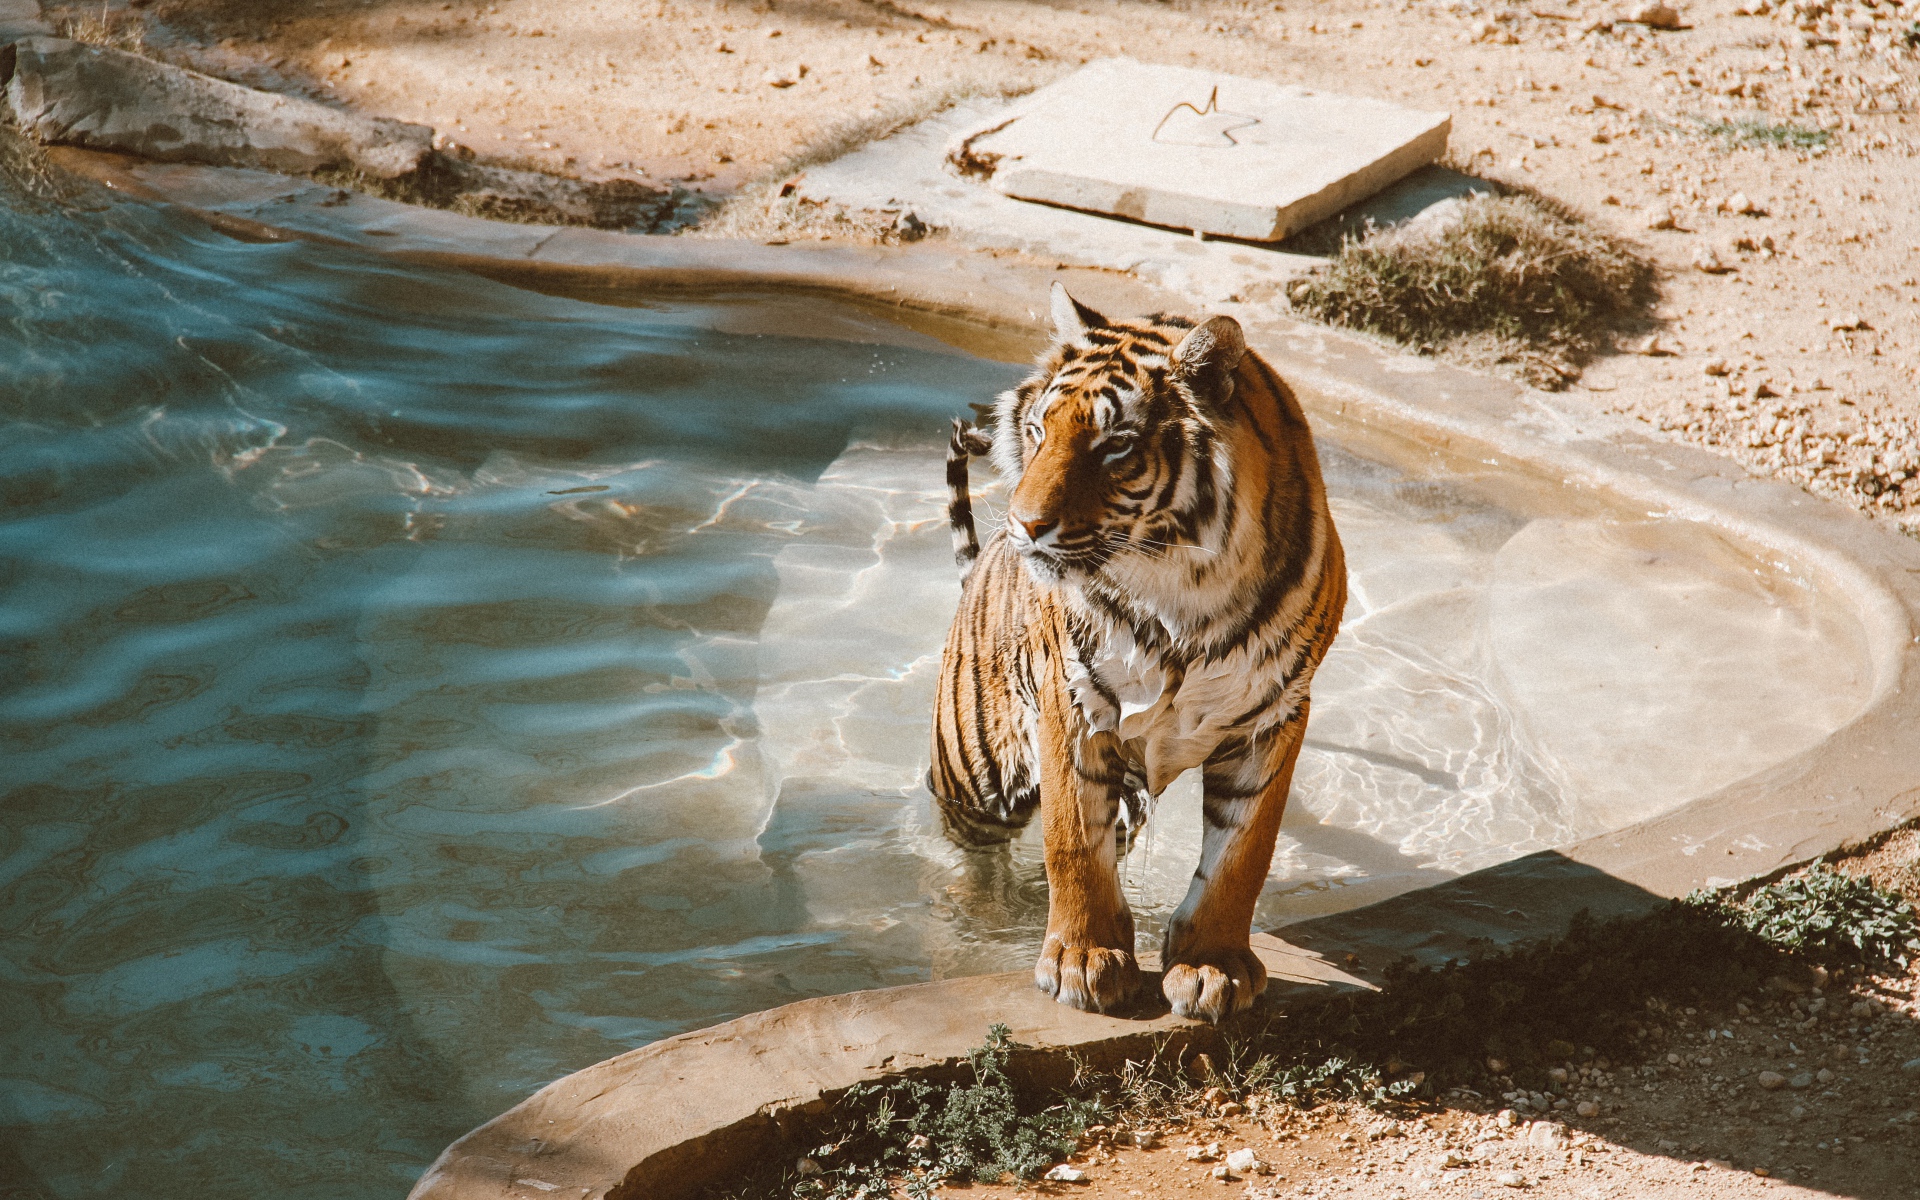 A large wet tiger climbs out of the pool